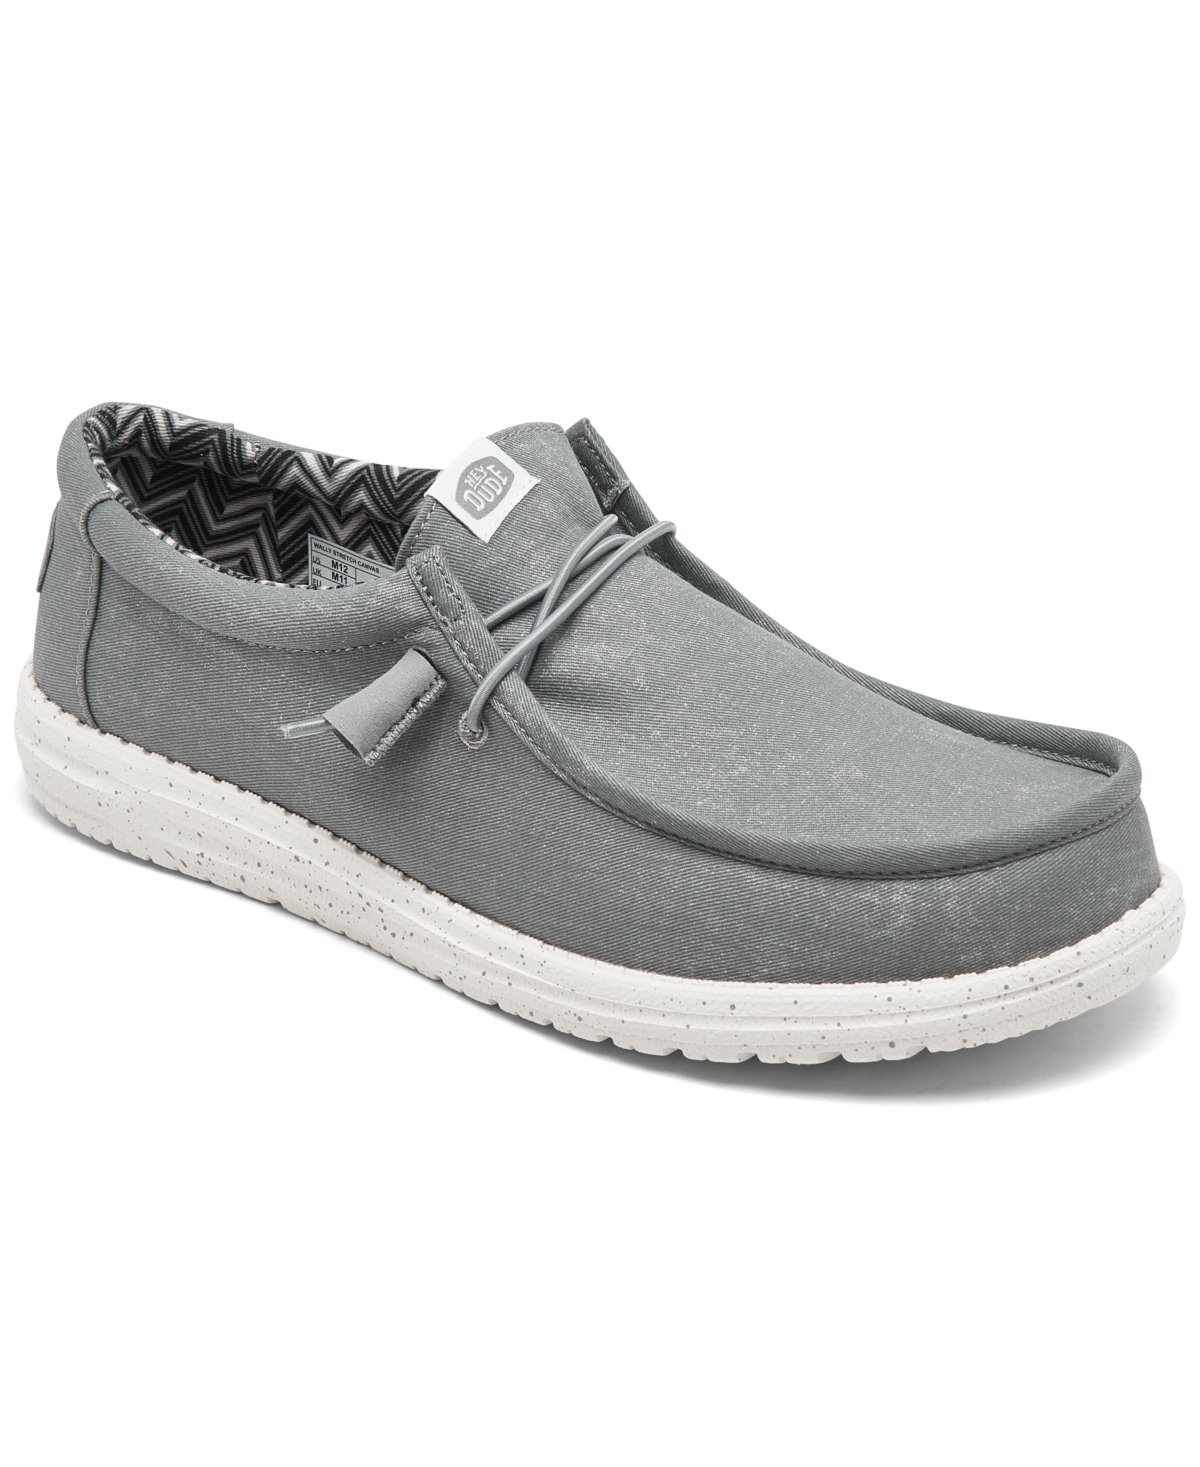 Men's Wally Canvas Casual Moccasin Sneakers from Finish Line - IRON